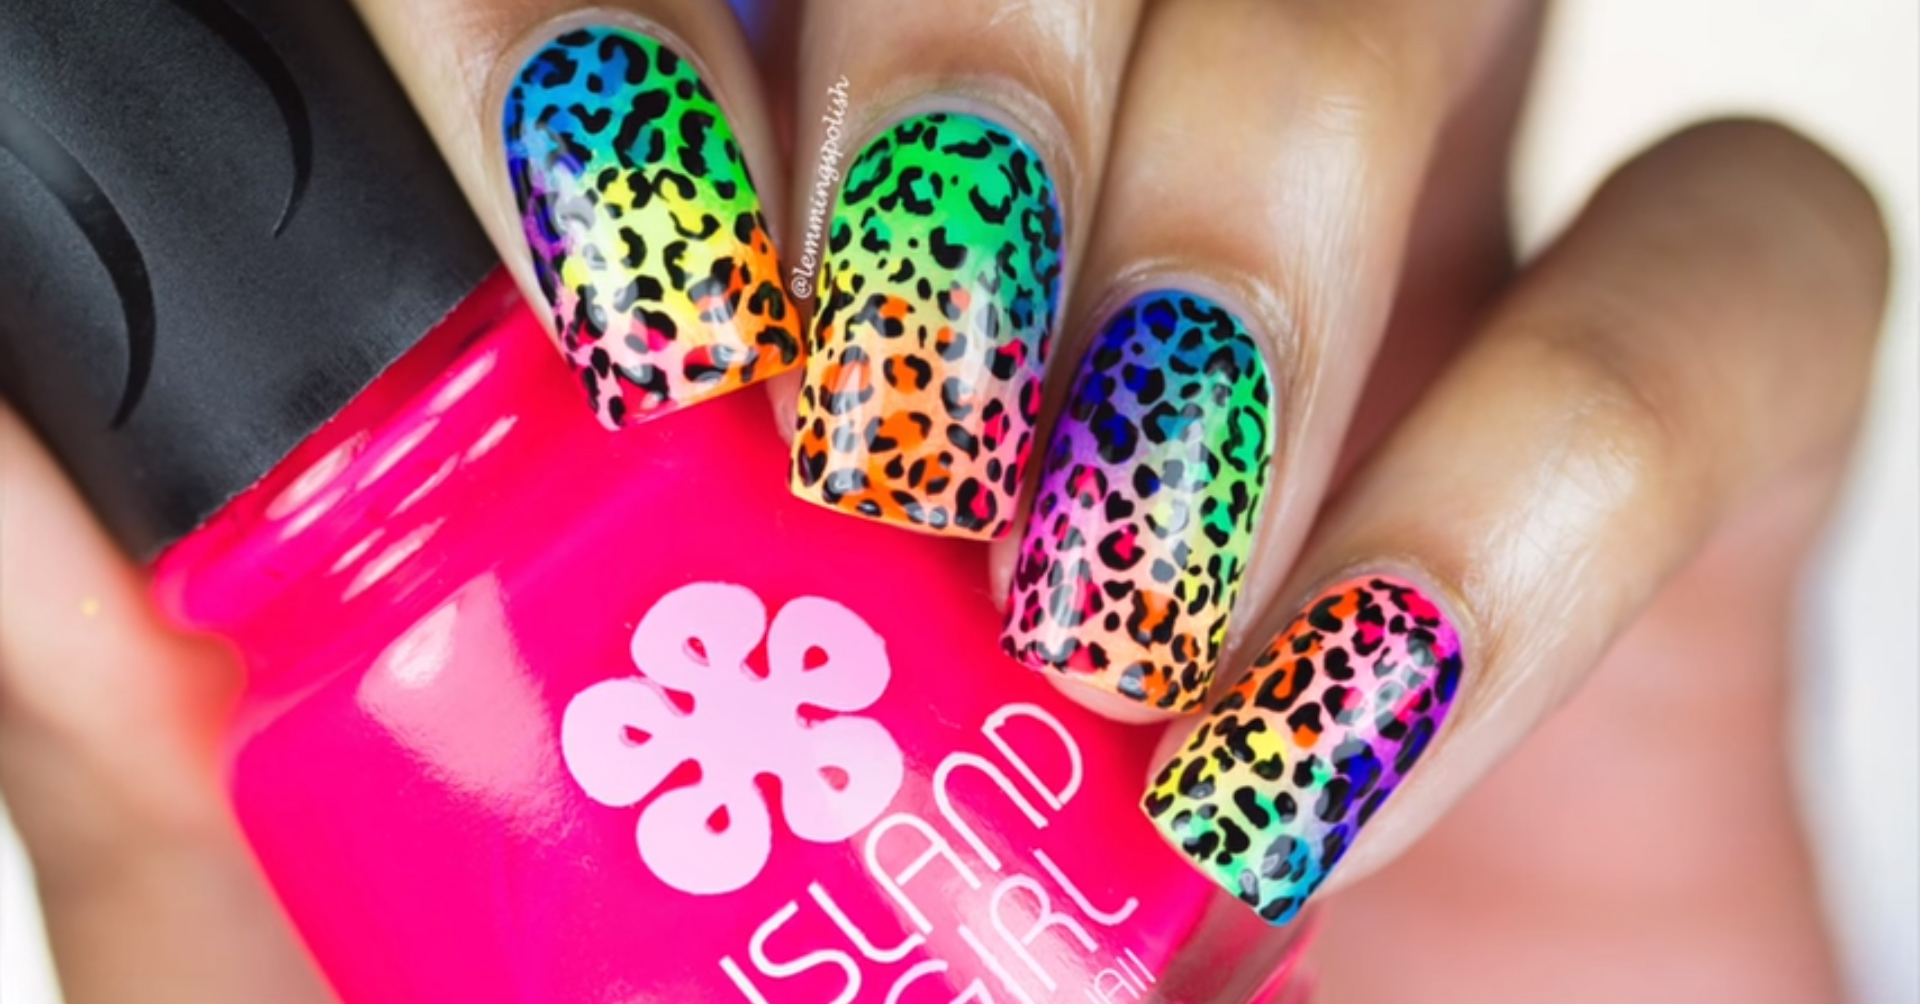 5. "Lisa Frank" inspired nails - wide 6